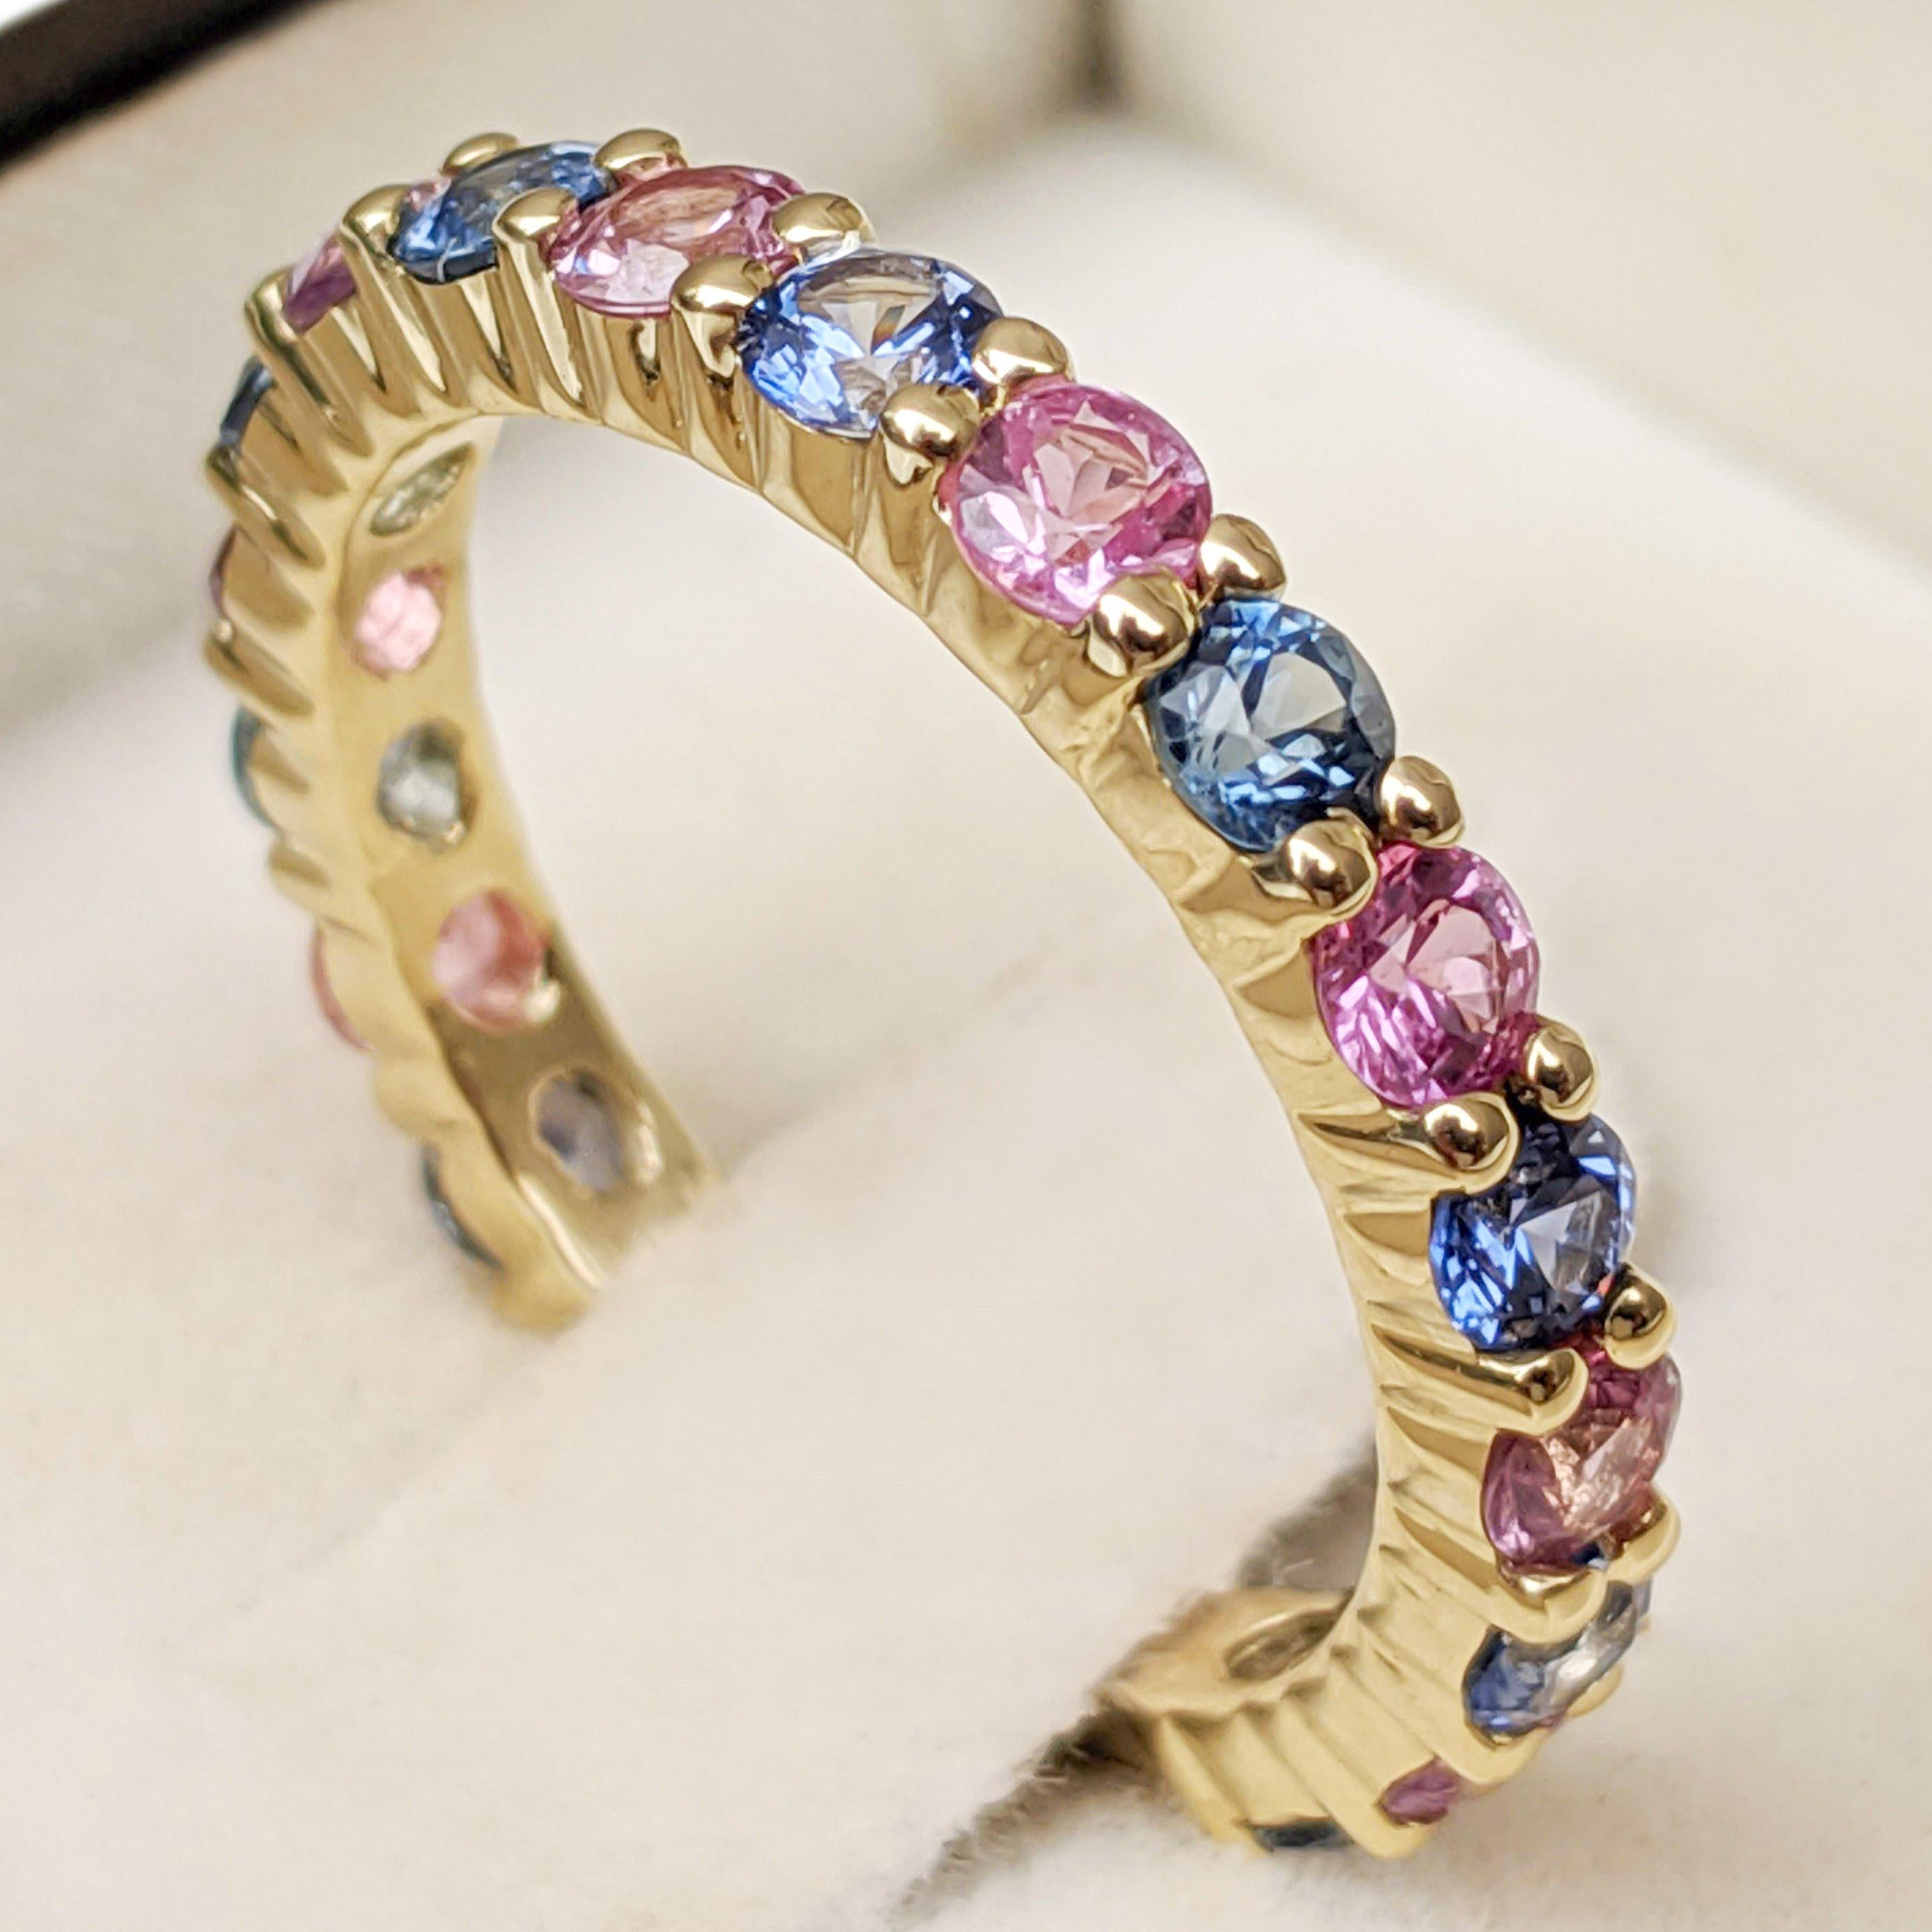 Women's $1 NO RESERVE! 1.90 Carat Sapphire 3/4 Eternity Band - 14 kt. Gold - Ring